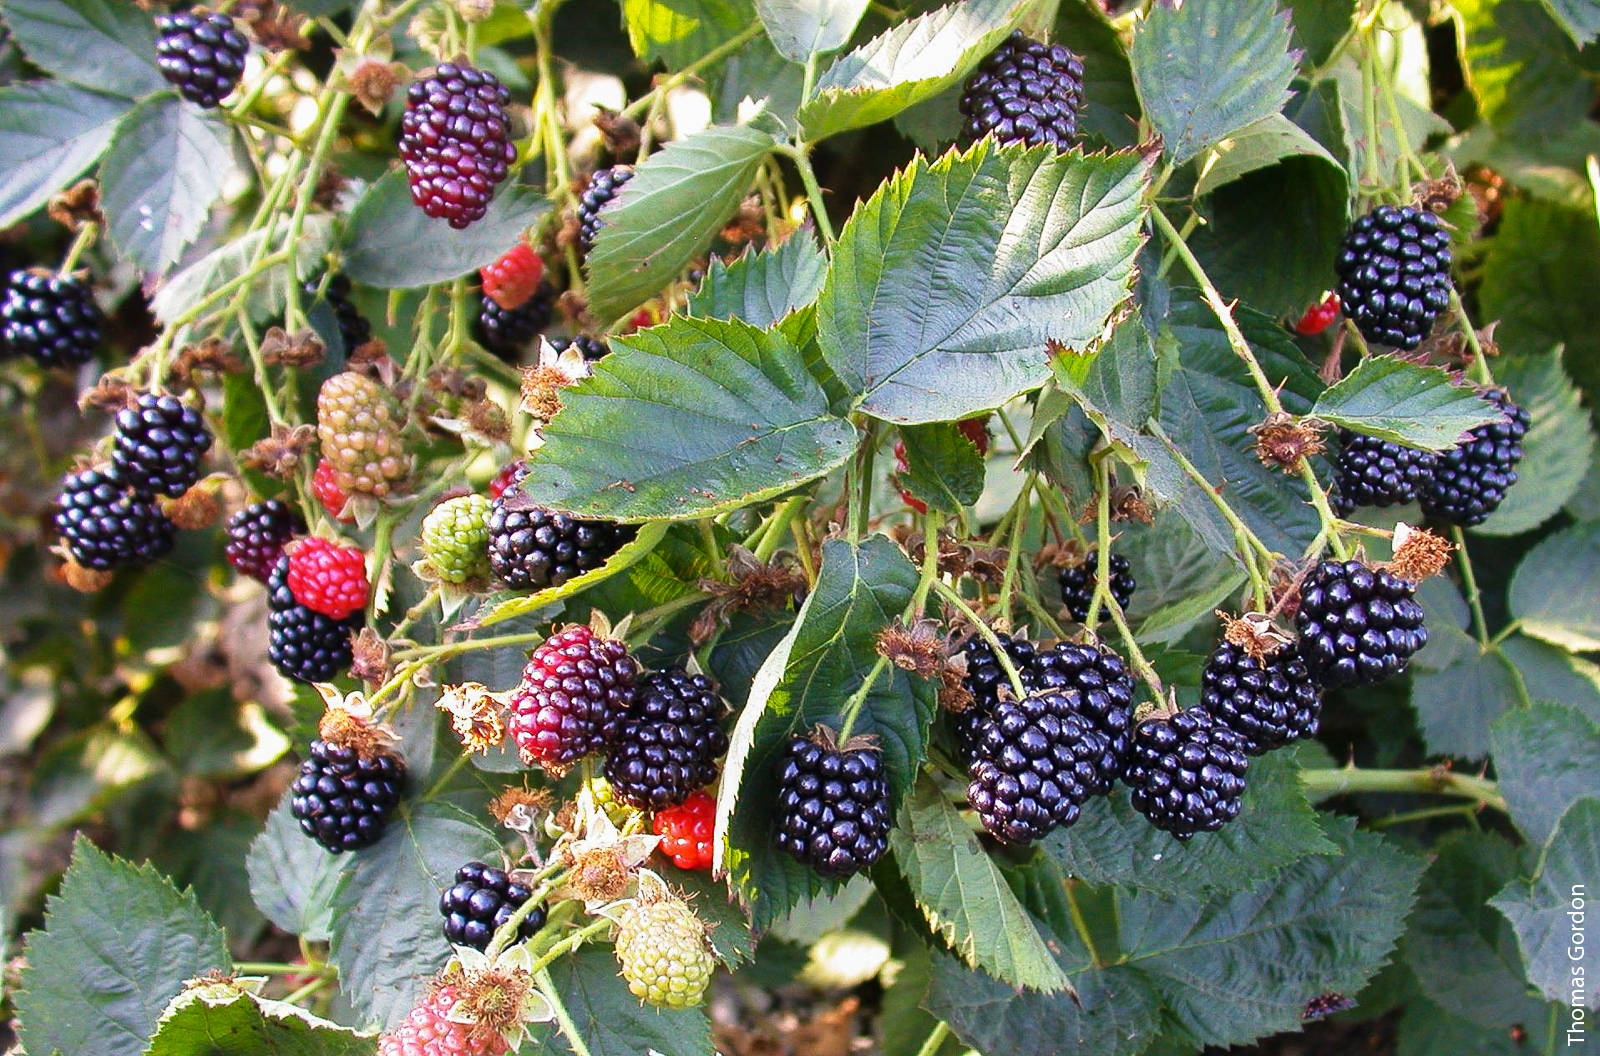 Timing the California blackberry harvest for late summer, when berries from other sources are scarce, helps growers maximize returns.